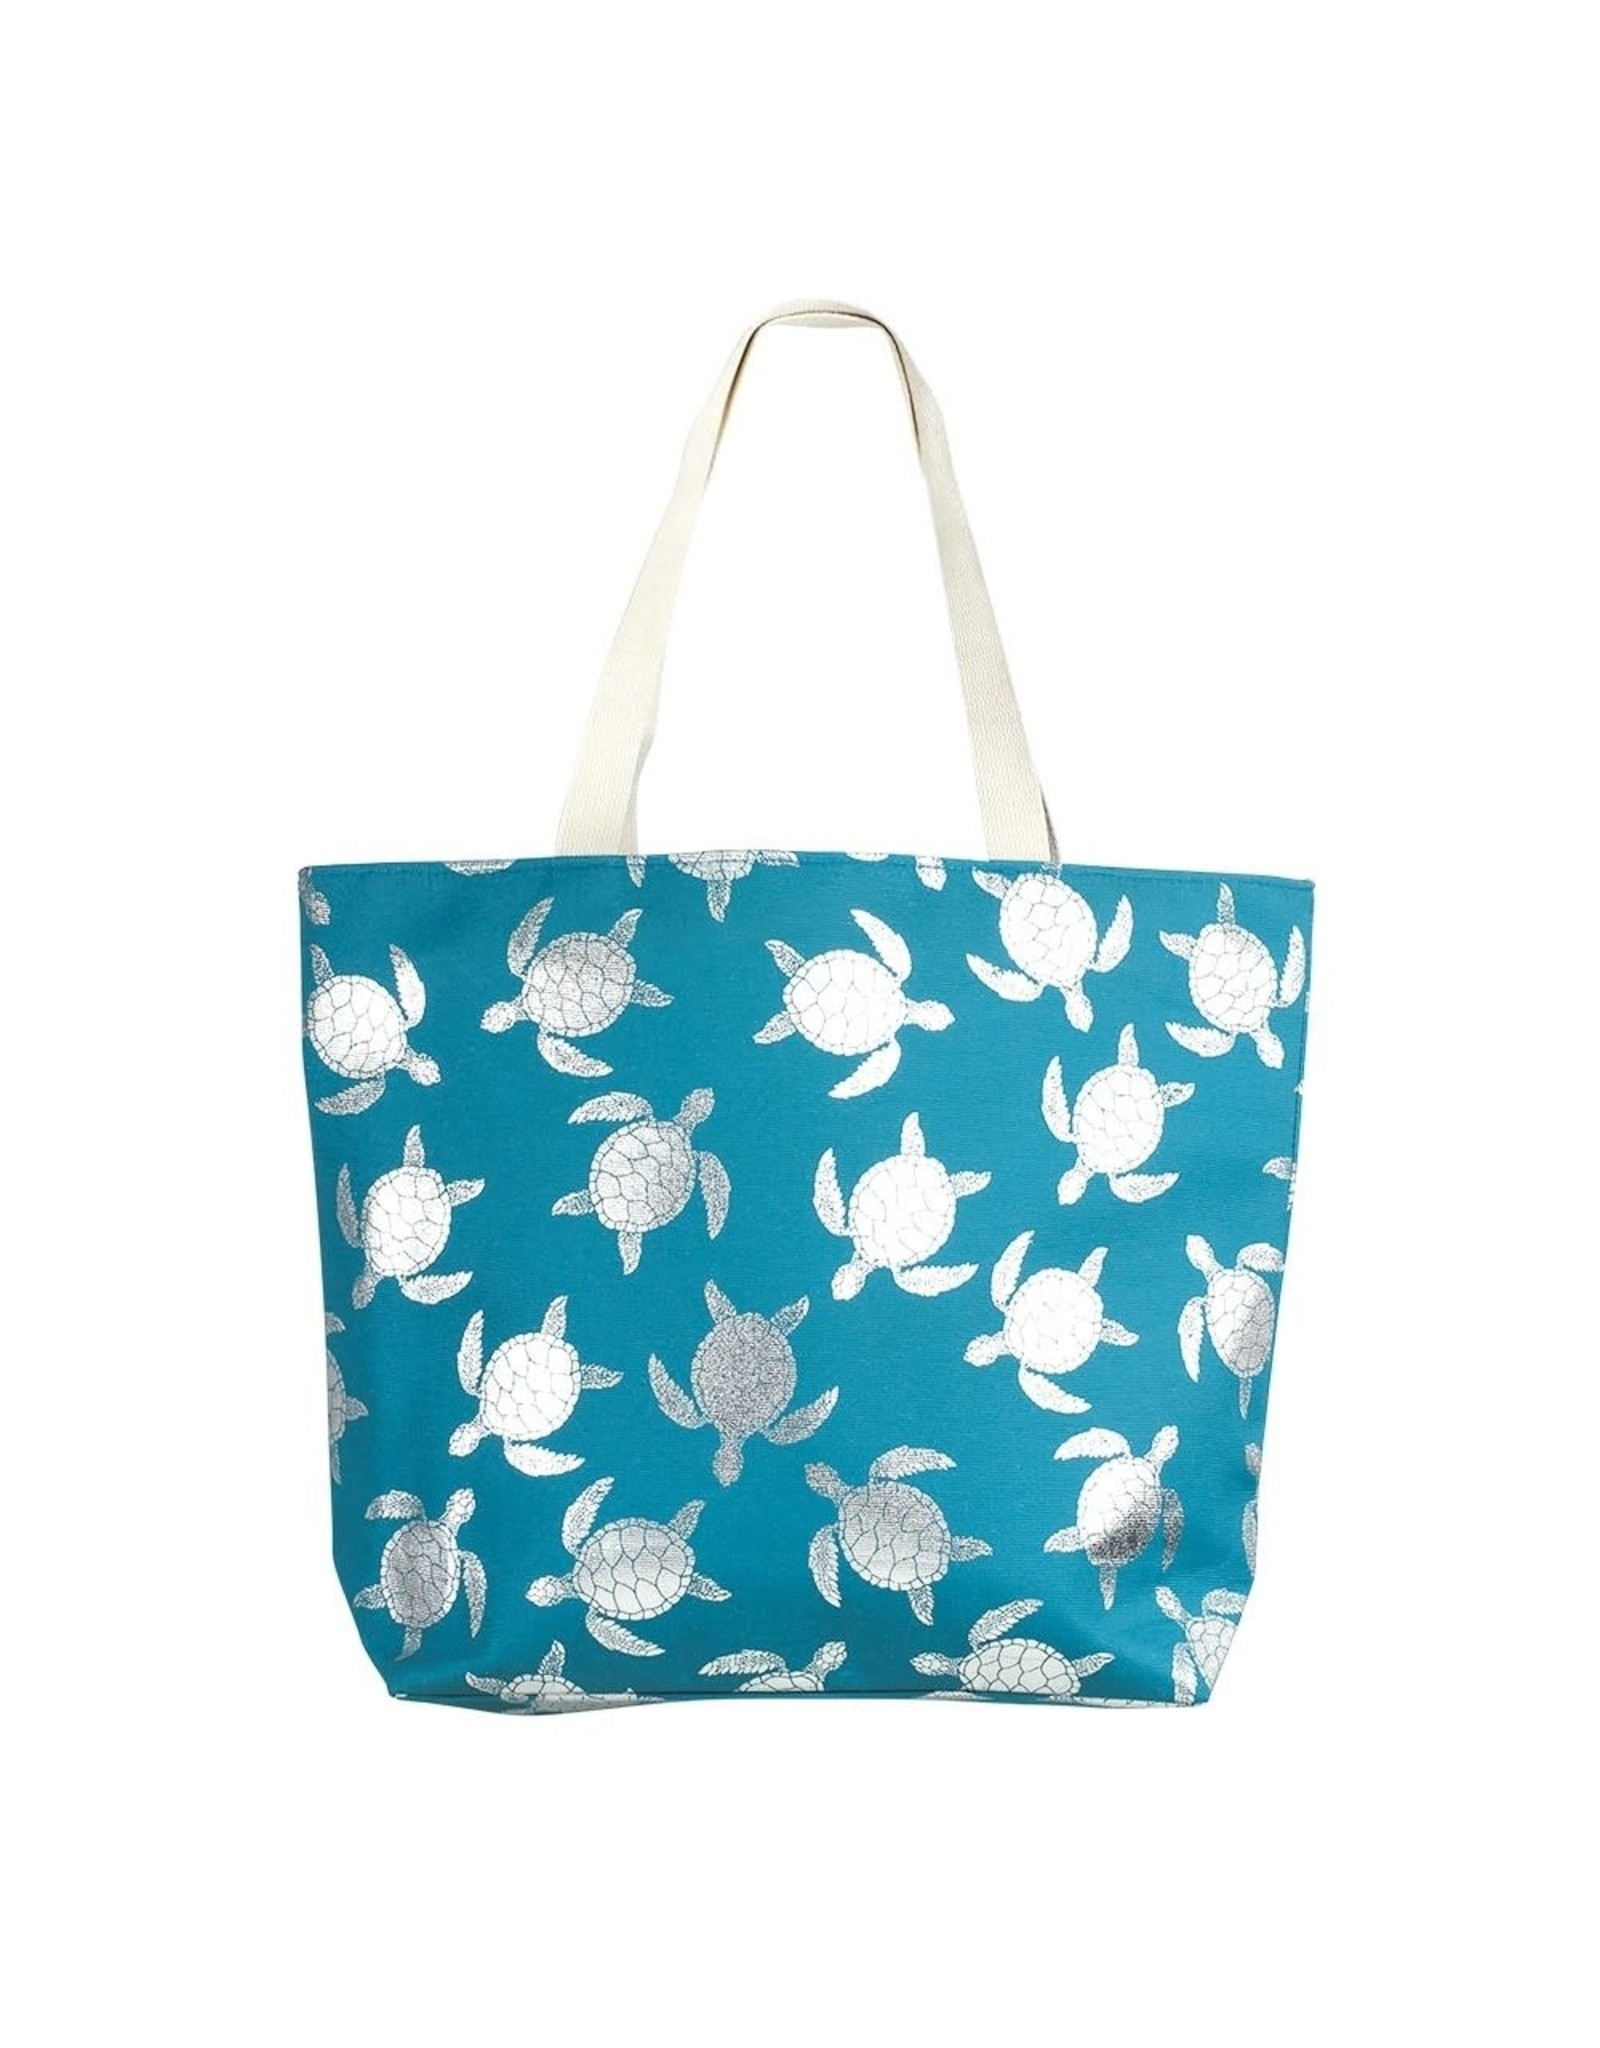 Periwinkle by Barlow Tote Bags Turquoise With Silver Sea Turtles Tote